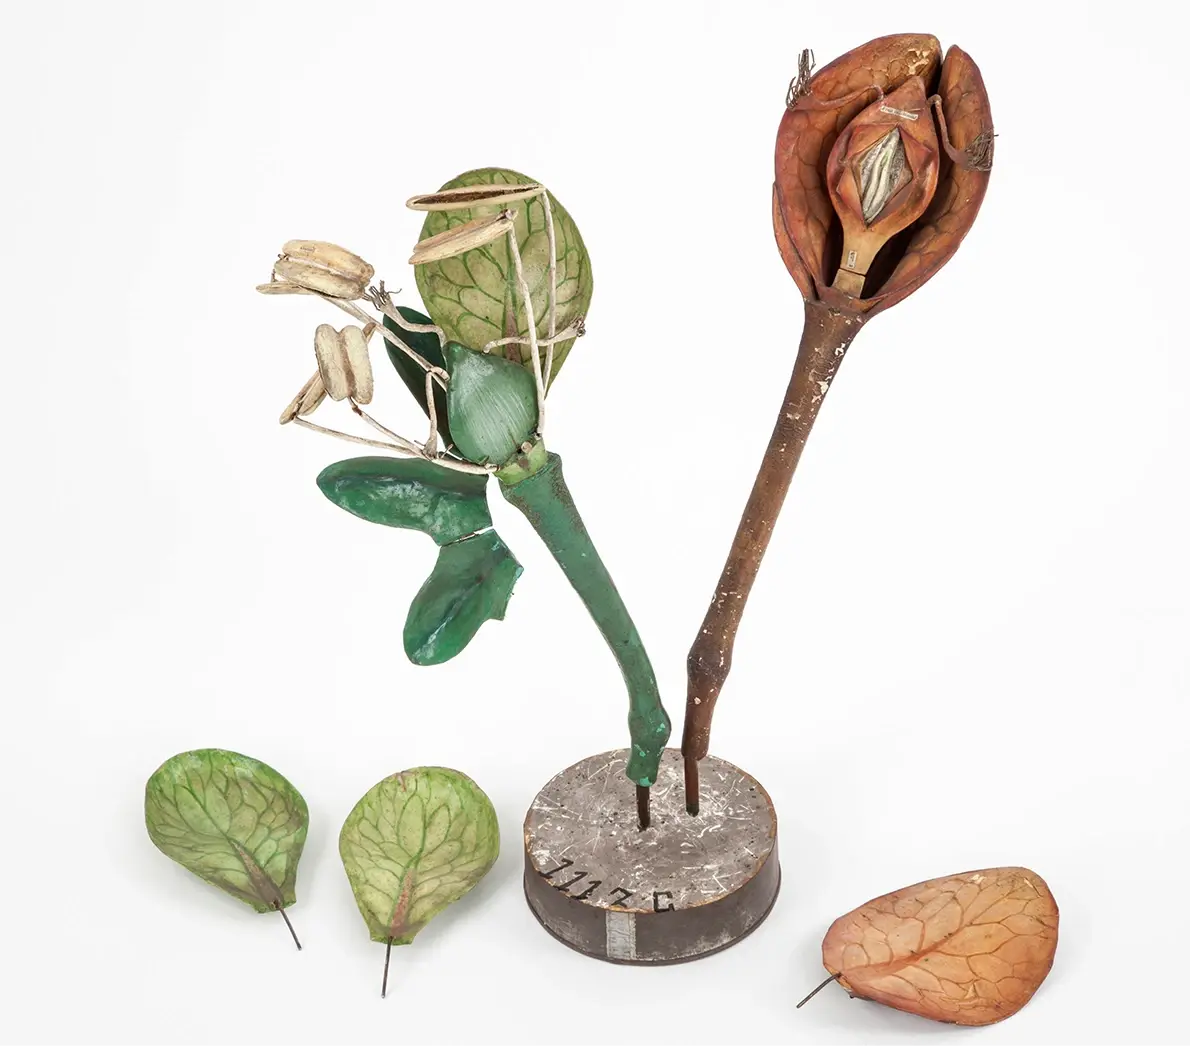 In the 1800s, companies such as Establishments de Dr. Auzoux and Brendel created plant models with detachable parts for schools. Children could use these models to learn. Nowadays, these unique models can be found in museums. School classes can use them to get to know the plant better and to discover how people in the past used to study plants and the environment.